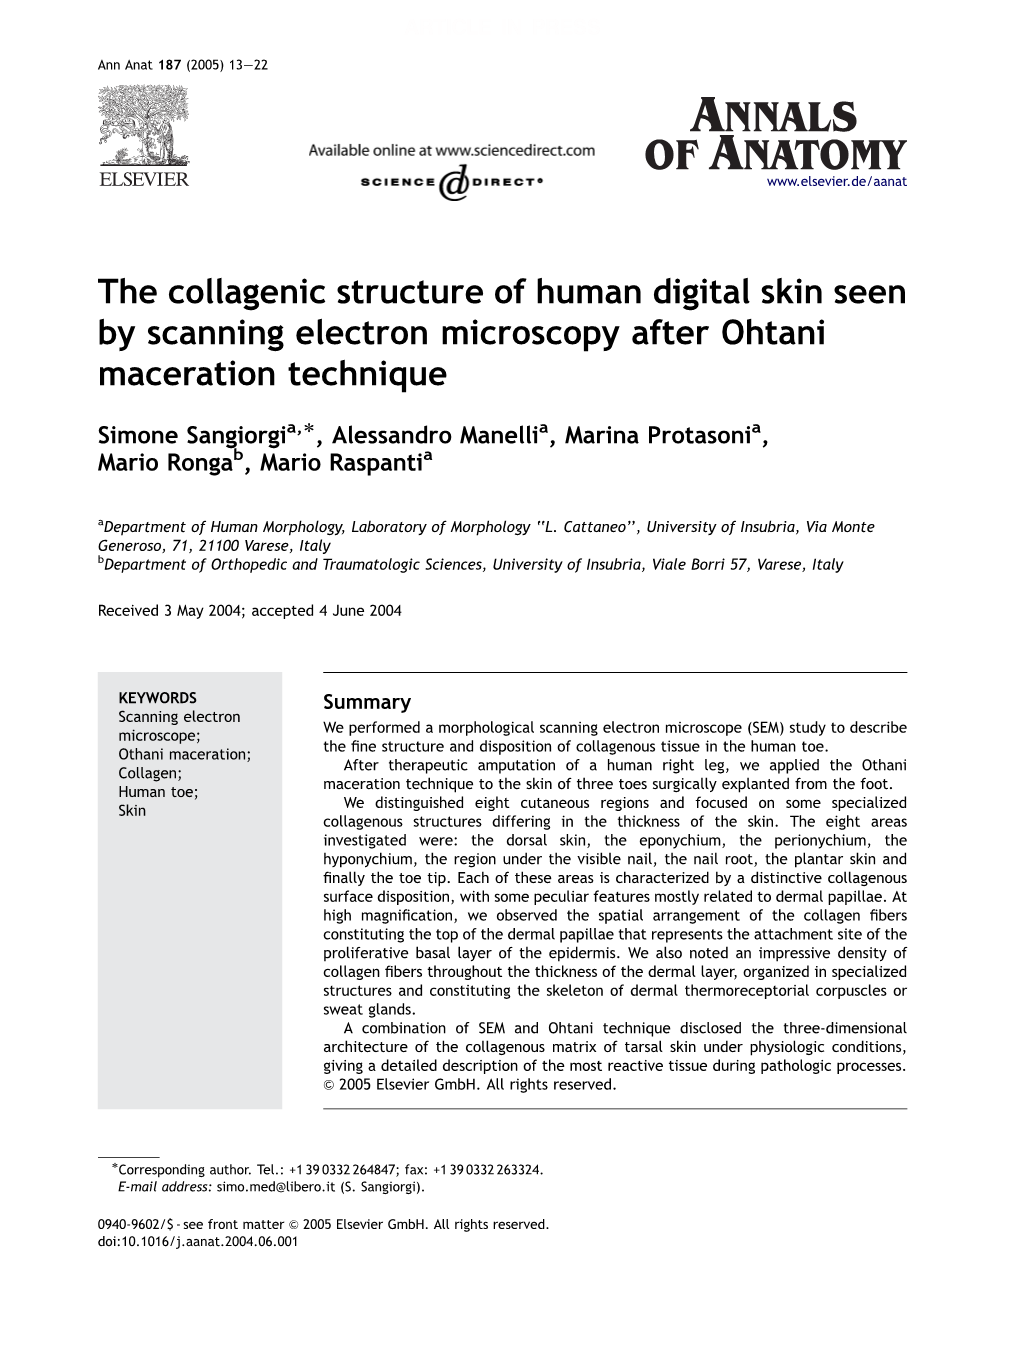 The Collagenic Structure of Human Digital Skin Seen by Scanning Electron Microscopy After Ohtani Maceration Technique